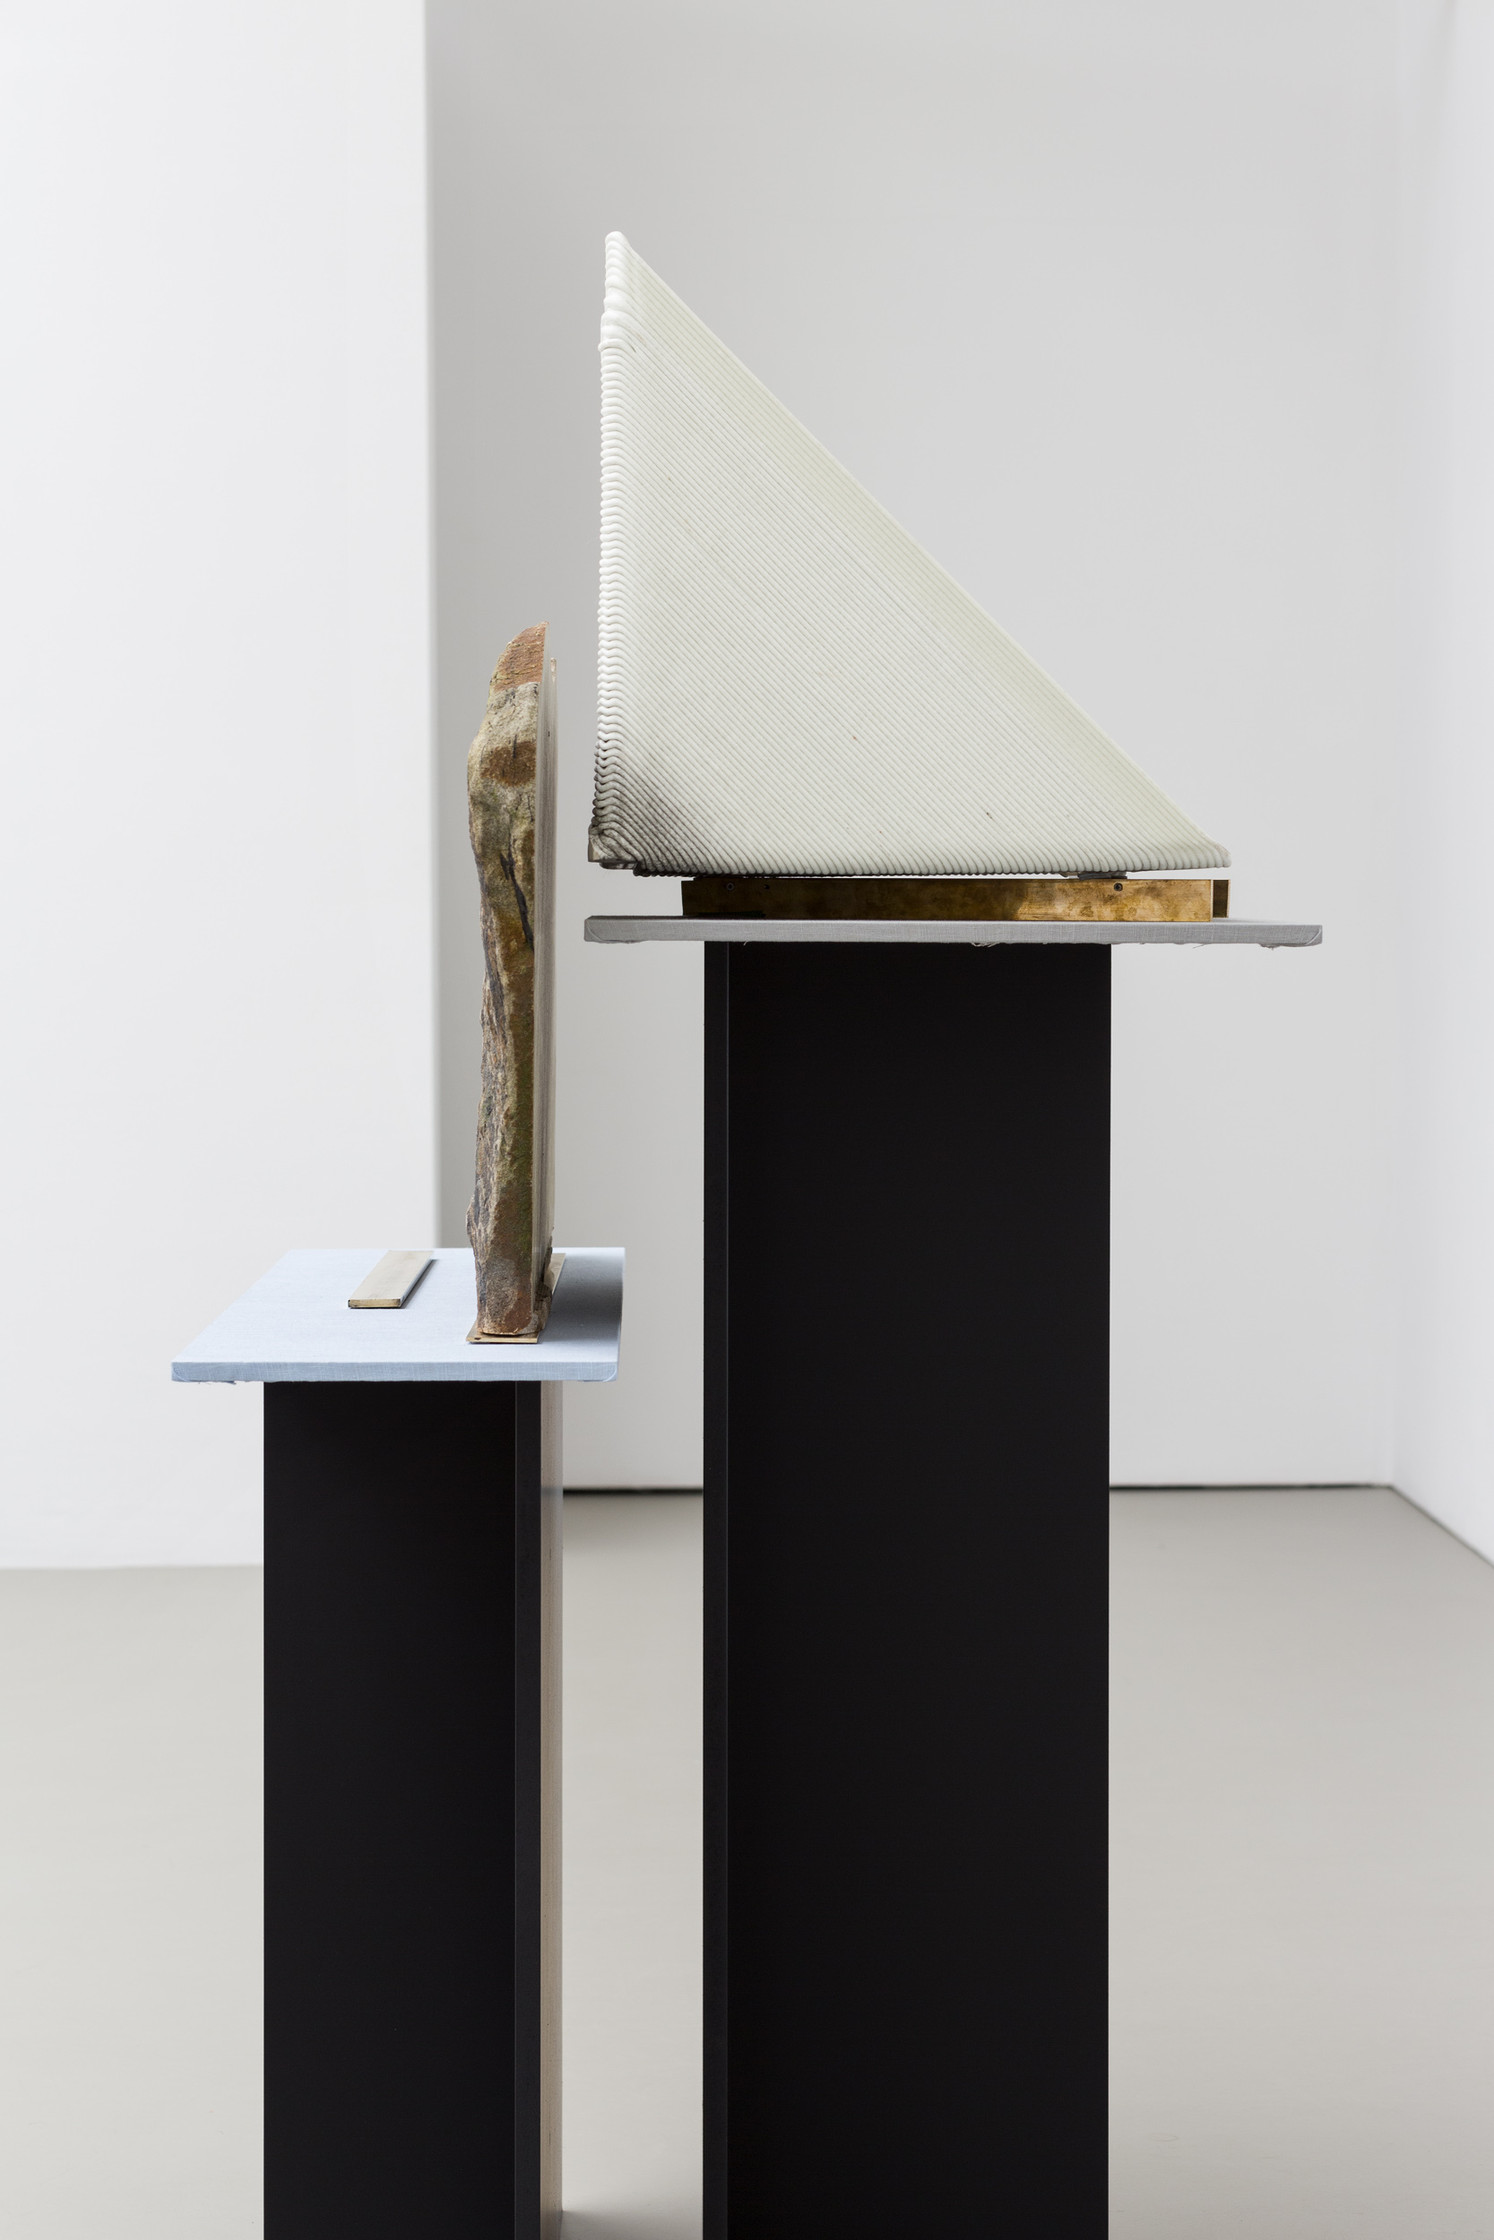 EXHIBITIONS | Galerie Fons Welters - Amsterdam